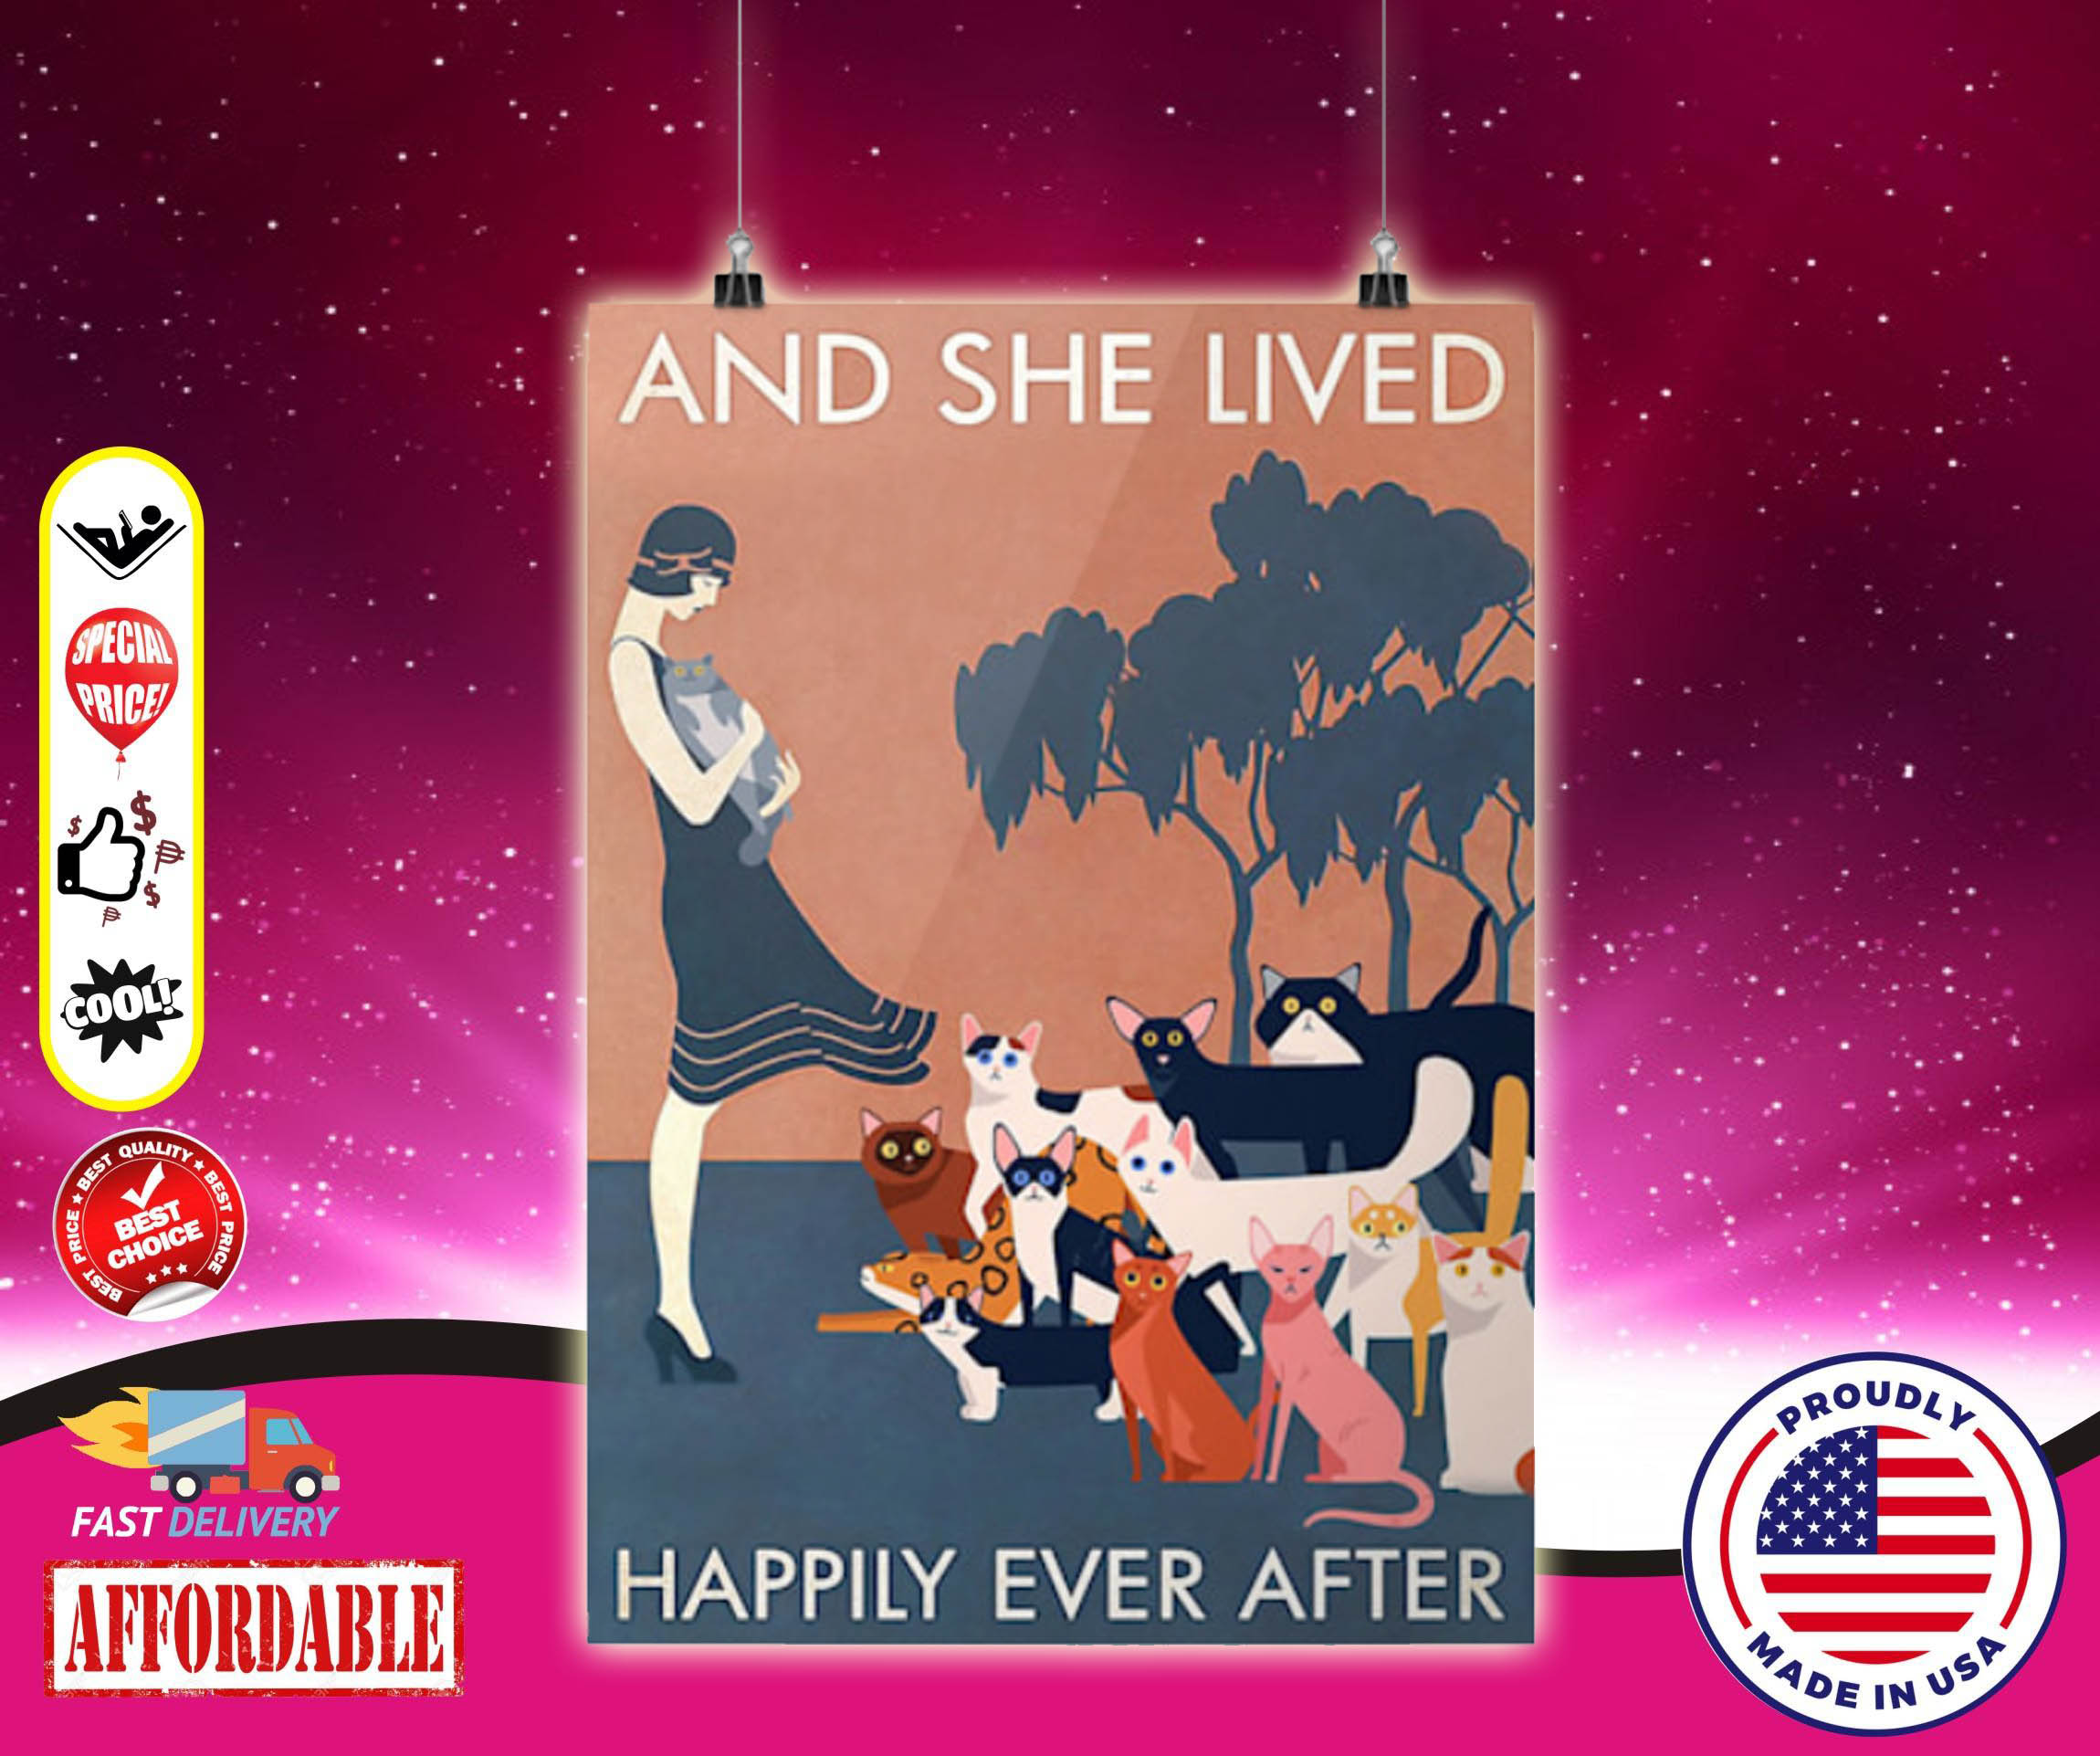 Cat and she lived happily ever after poster 3